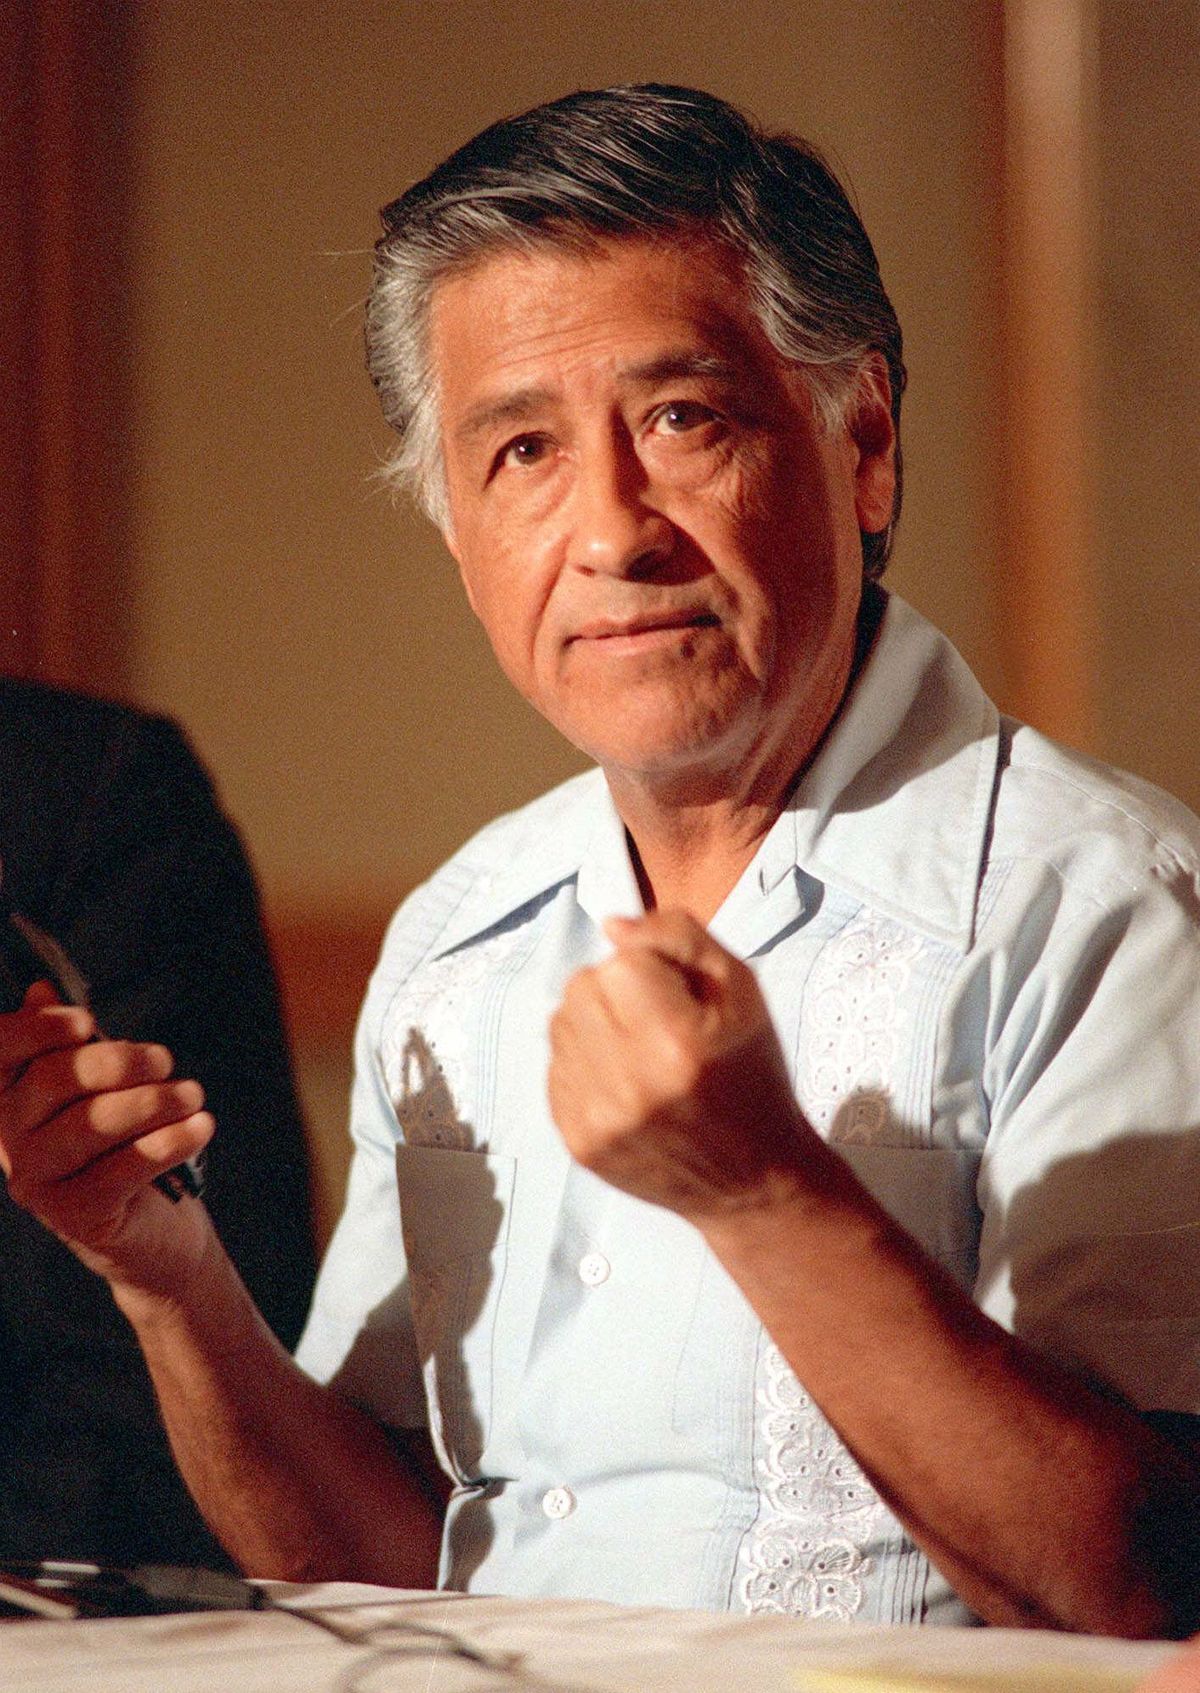 FILE - In this March 8, 1989 file photo, Cesar Chavez gestures as he speaks during a news conference in Los Angeles. Today, the foothills of the Tehachapi mountains continue to house the United Farm Workers of America headquarters and memorials to Chavez, though farmworkers no longer live there. President Obama is designating parts of the property as a national monument and visiting the site on Monday, a move seen as likely to shore up support from Hispanic and progressive voters just five weeks before the election. (Alan Greth / Associated Press)